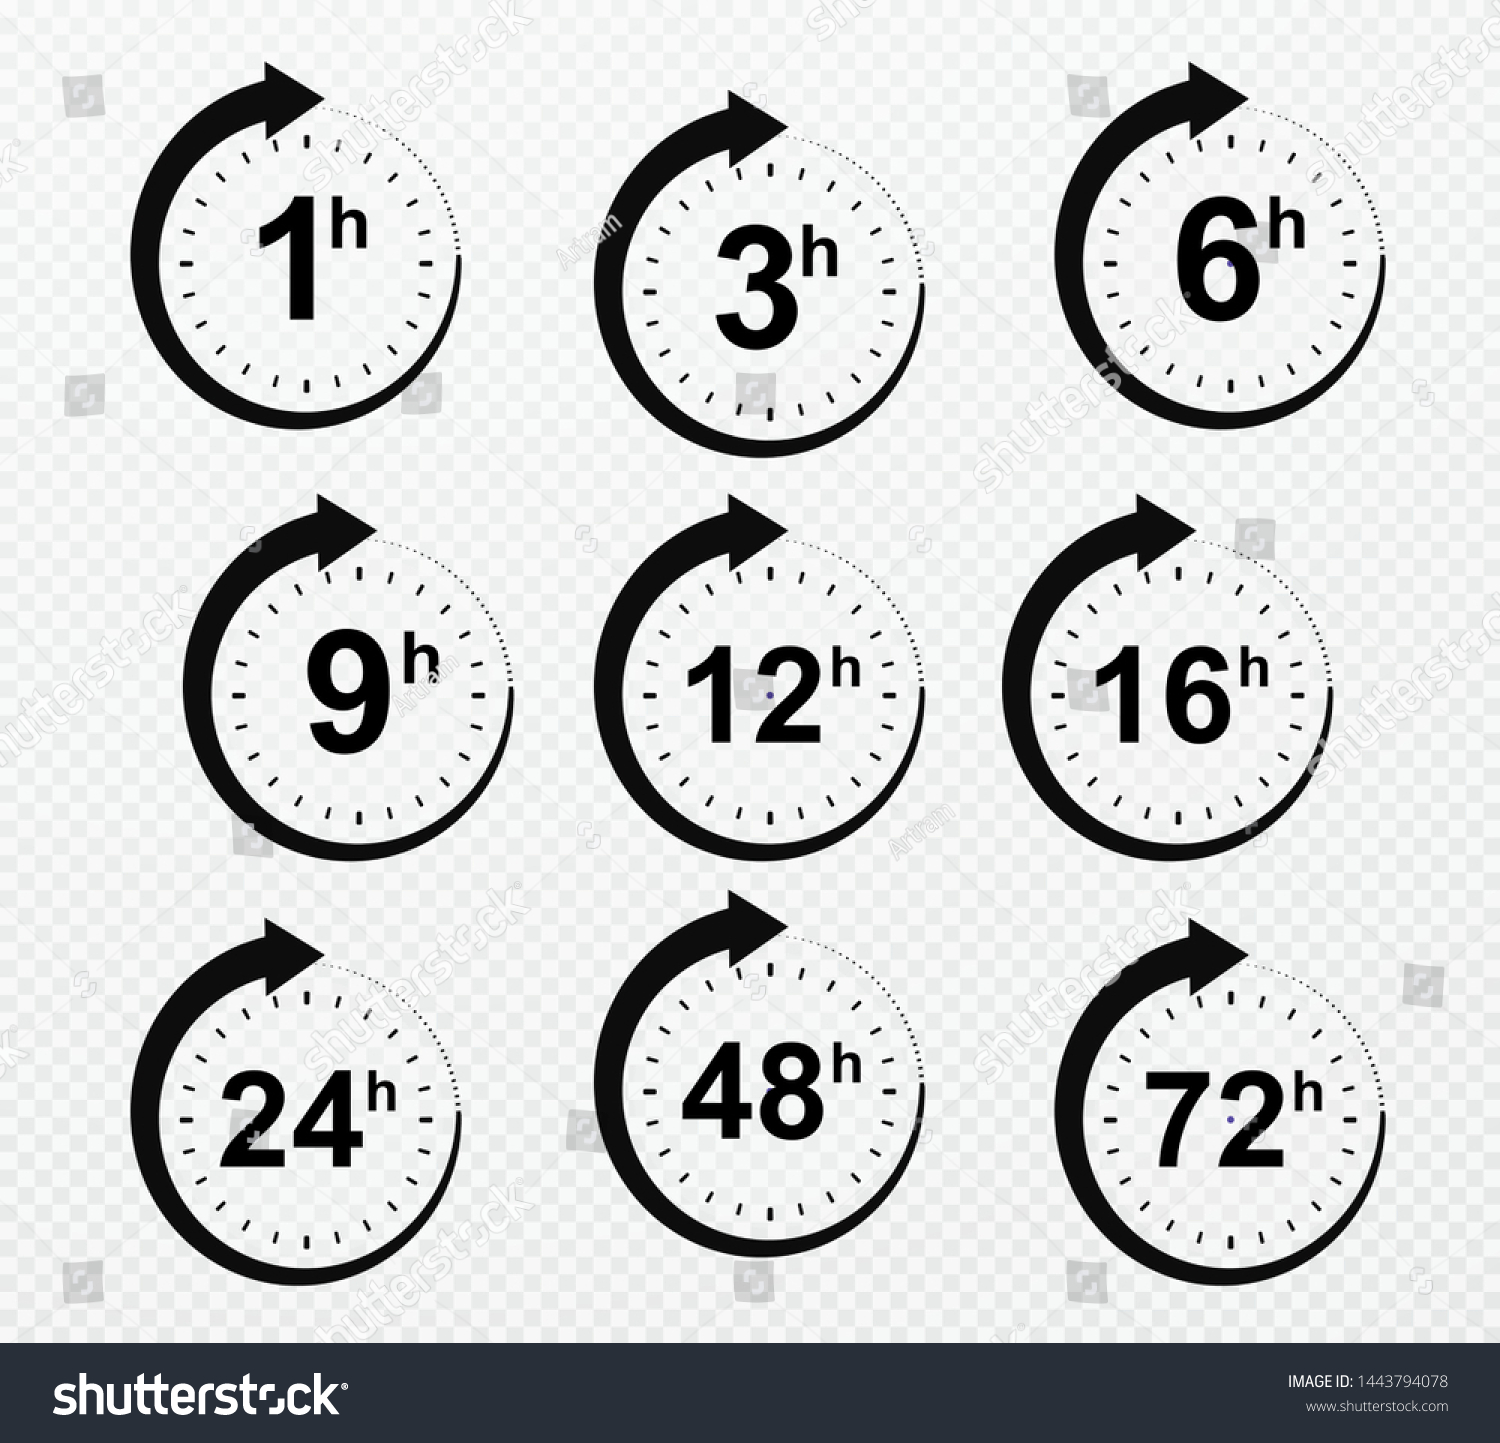 SVG of Clock arrow 1, 3, 6, 9, 12, 16, 24, 48, 72 hours. Set of delivery service time icons. svg